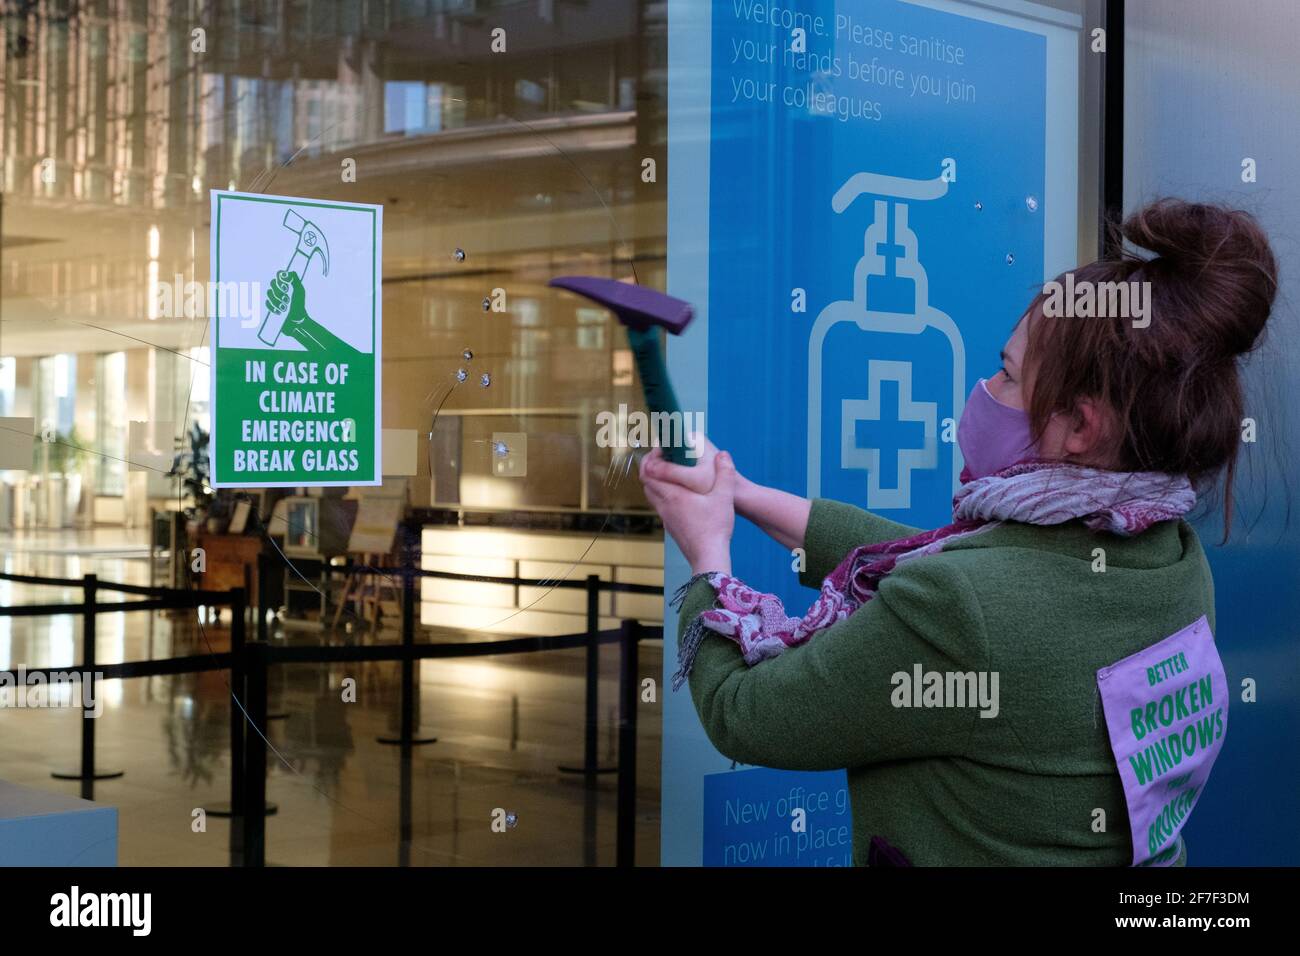 In Case Of Emergency Break Glass High Resolution Stock Photography And Images Alamy